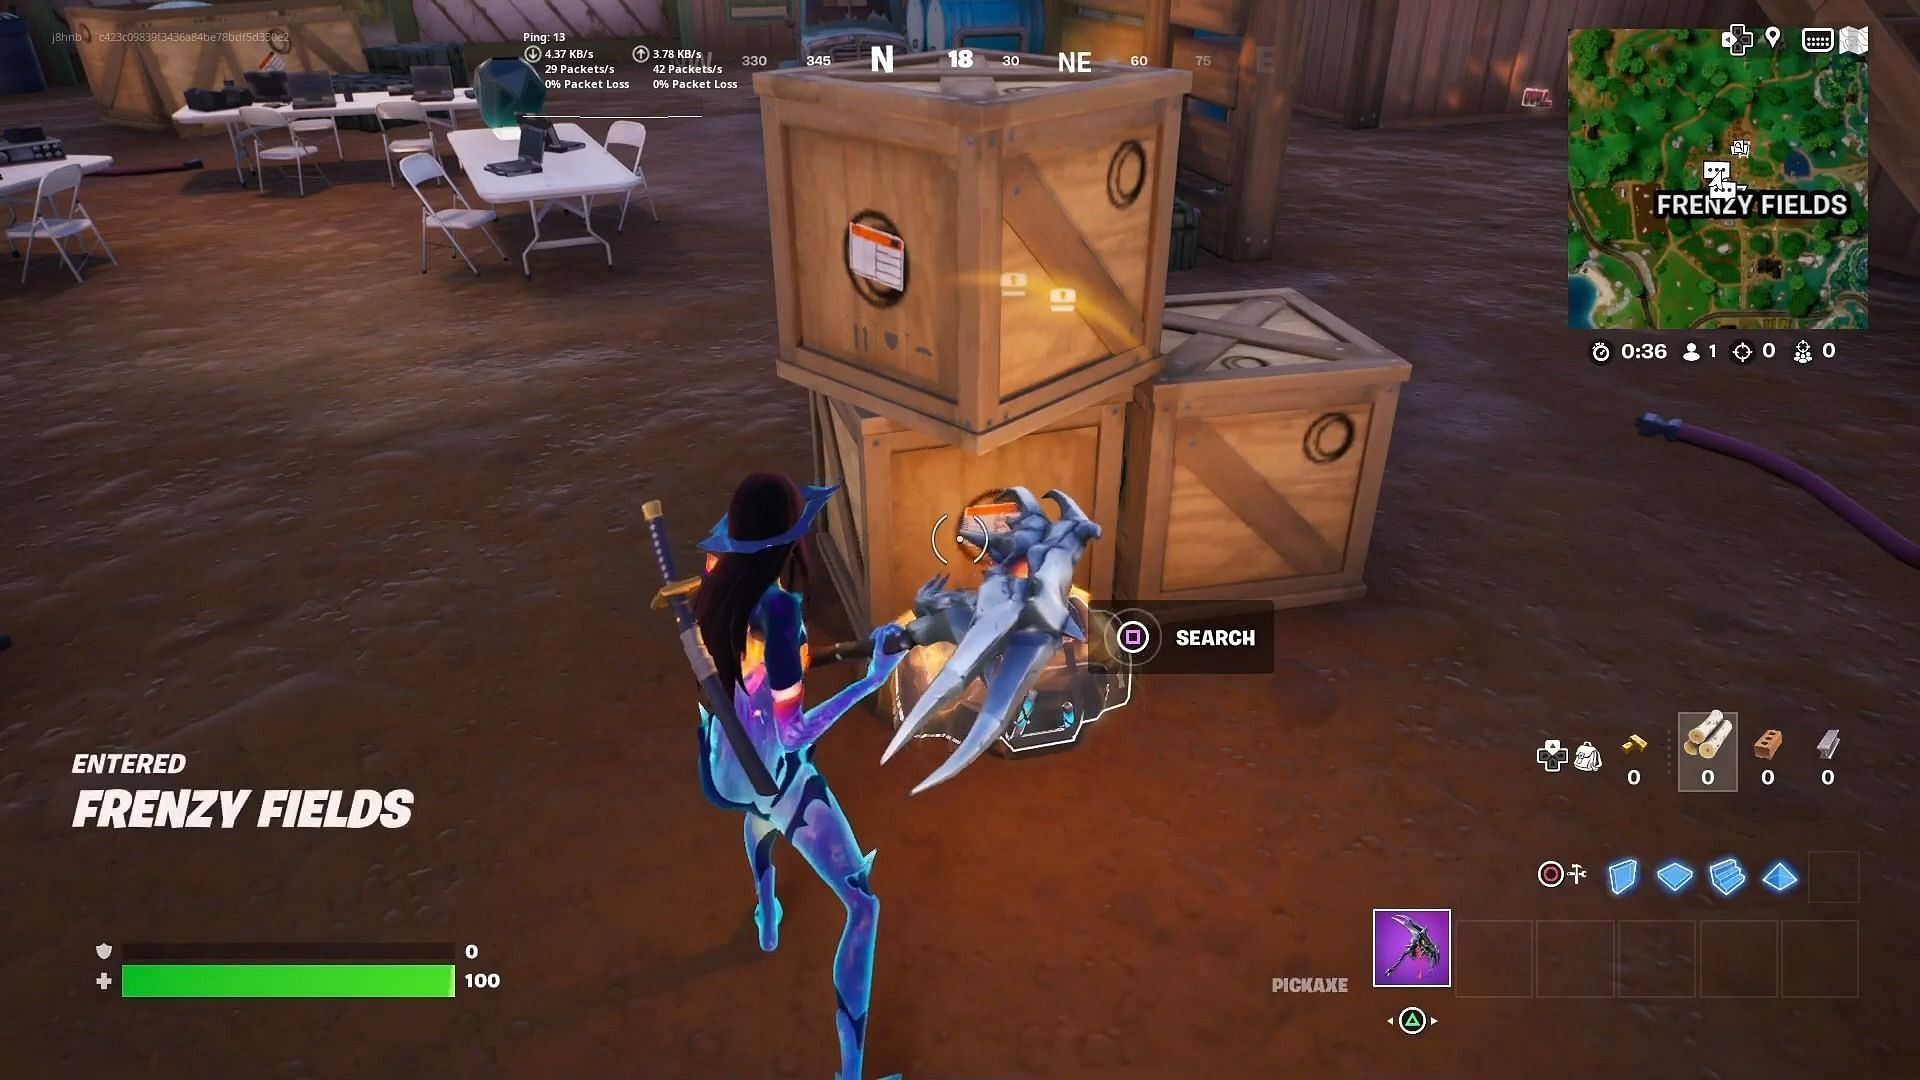 Opening chests in Frenzy Fields in Fortnite (Image via Epic Games)